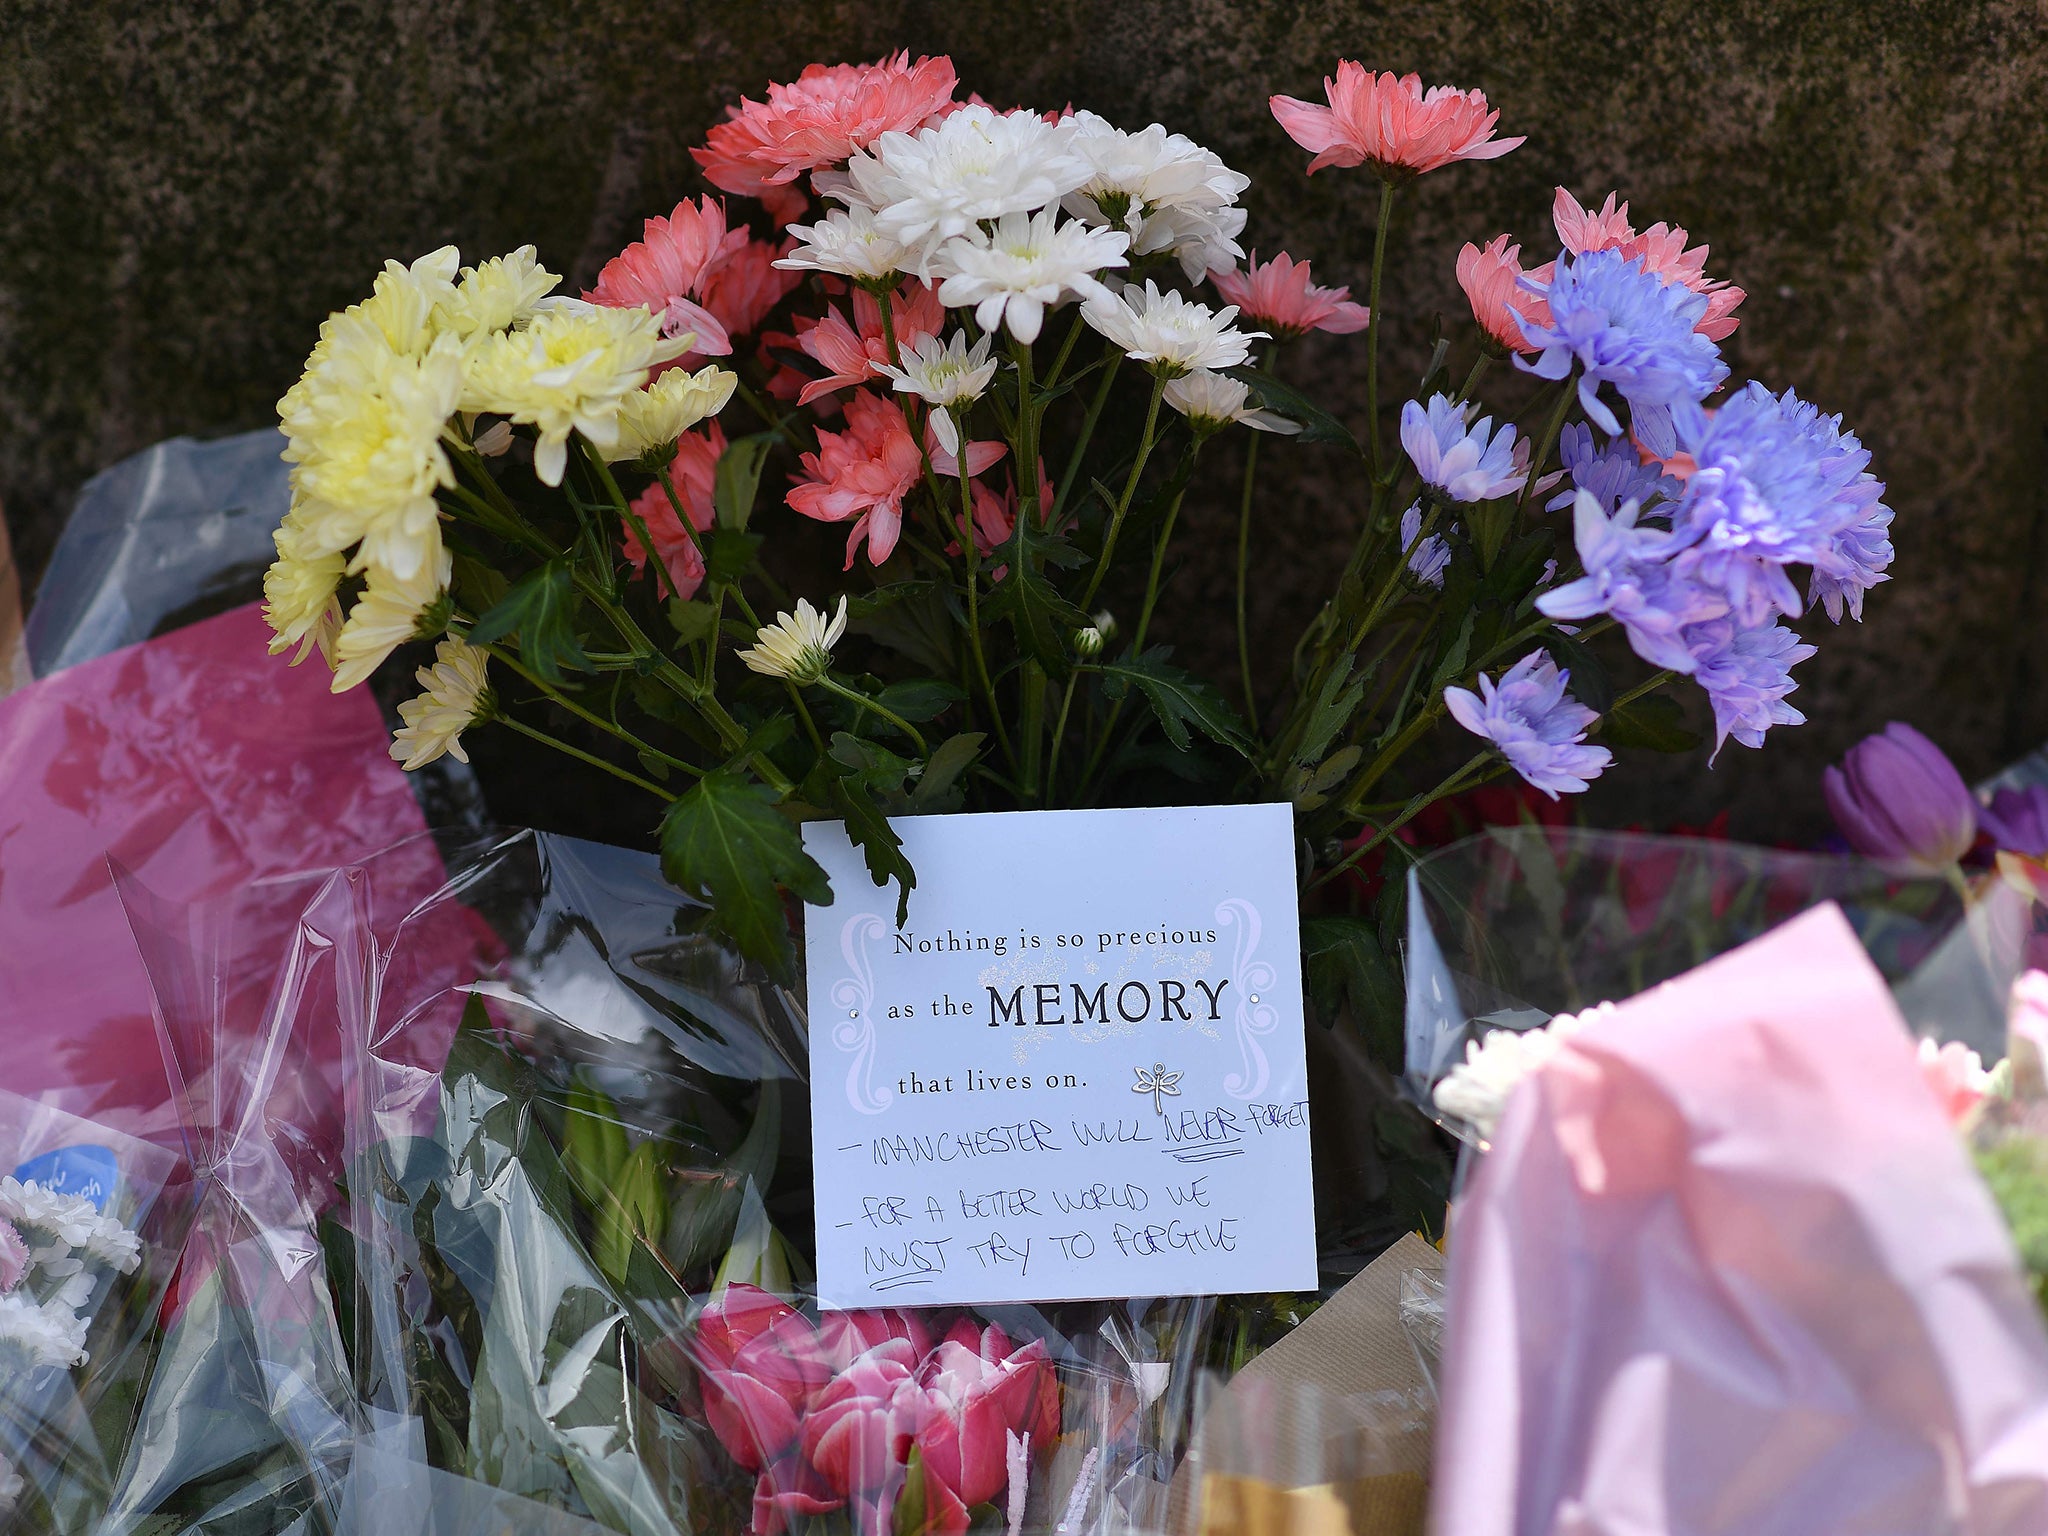 Floral tributes are arriving at the scene in Manchester, where 22 people have been confirmed to have lost their lives